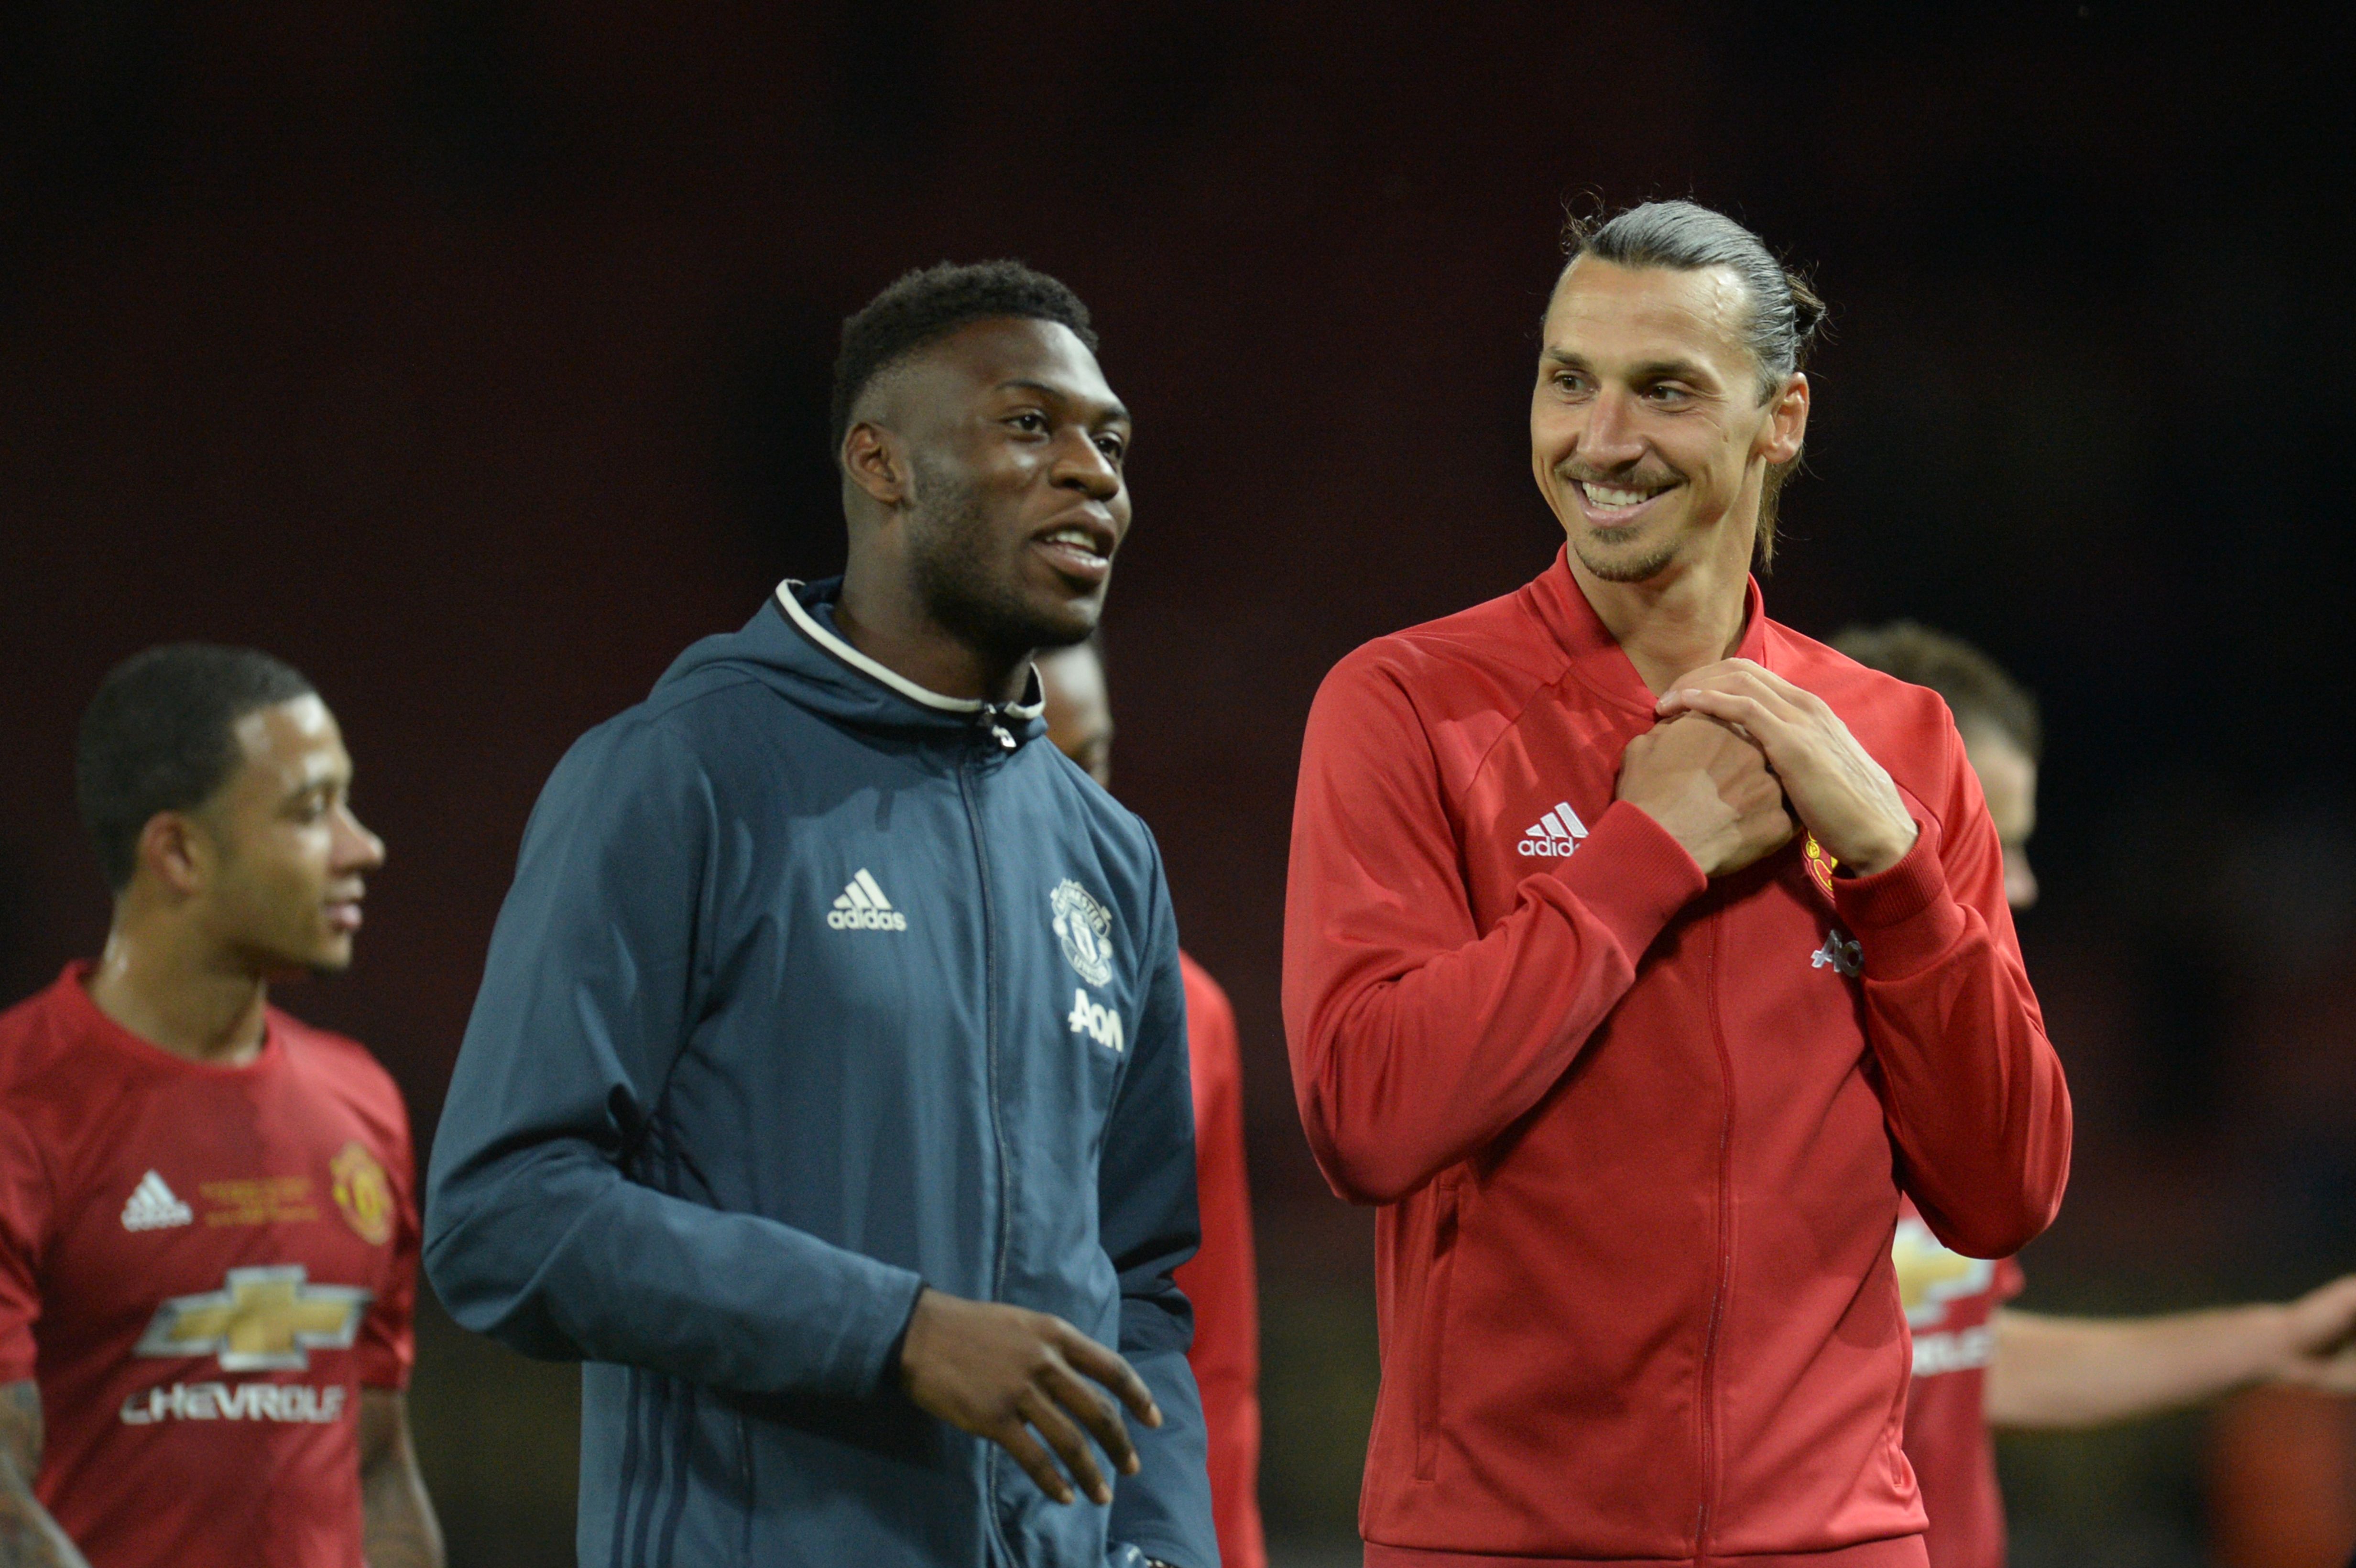 Manchester United's Swedish striker Zlatan Ibrahimovic (R) talks with Manchester United's Dutch defender Timothy Fosu-Mensah (L) at the end of the friendly Wayne Rooney testimonial football match between Manchester United and Everton at Old Trafford in Manchester, northwest England, on August 3, 2016.  / AFP / OLI SCARFF        (Photo credit should read OLI SCARFF/AFP/Getty Images)